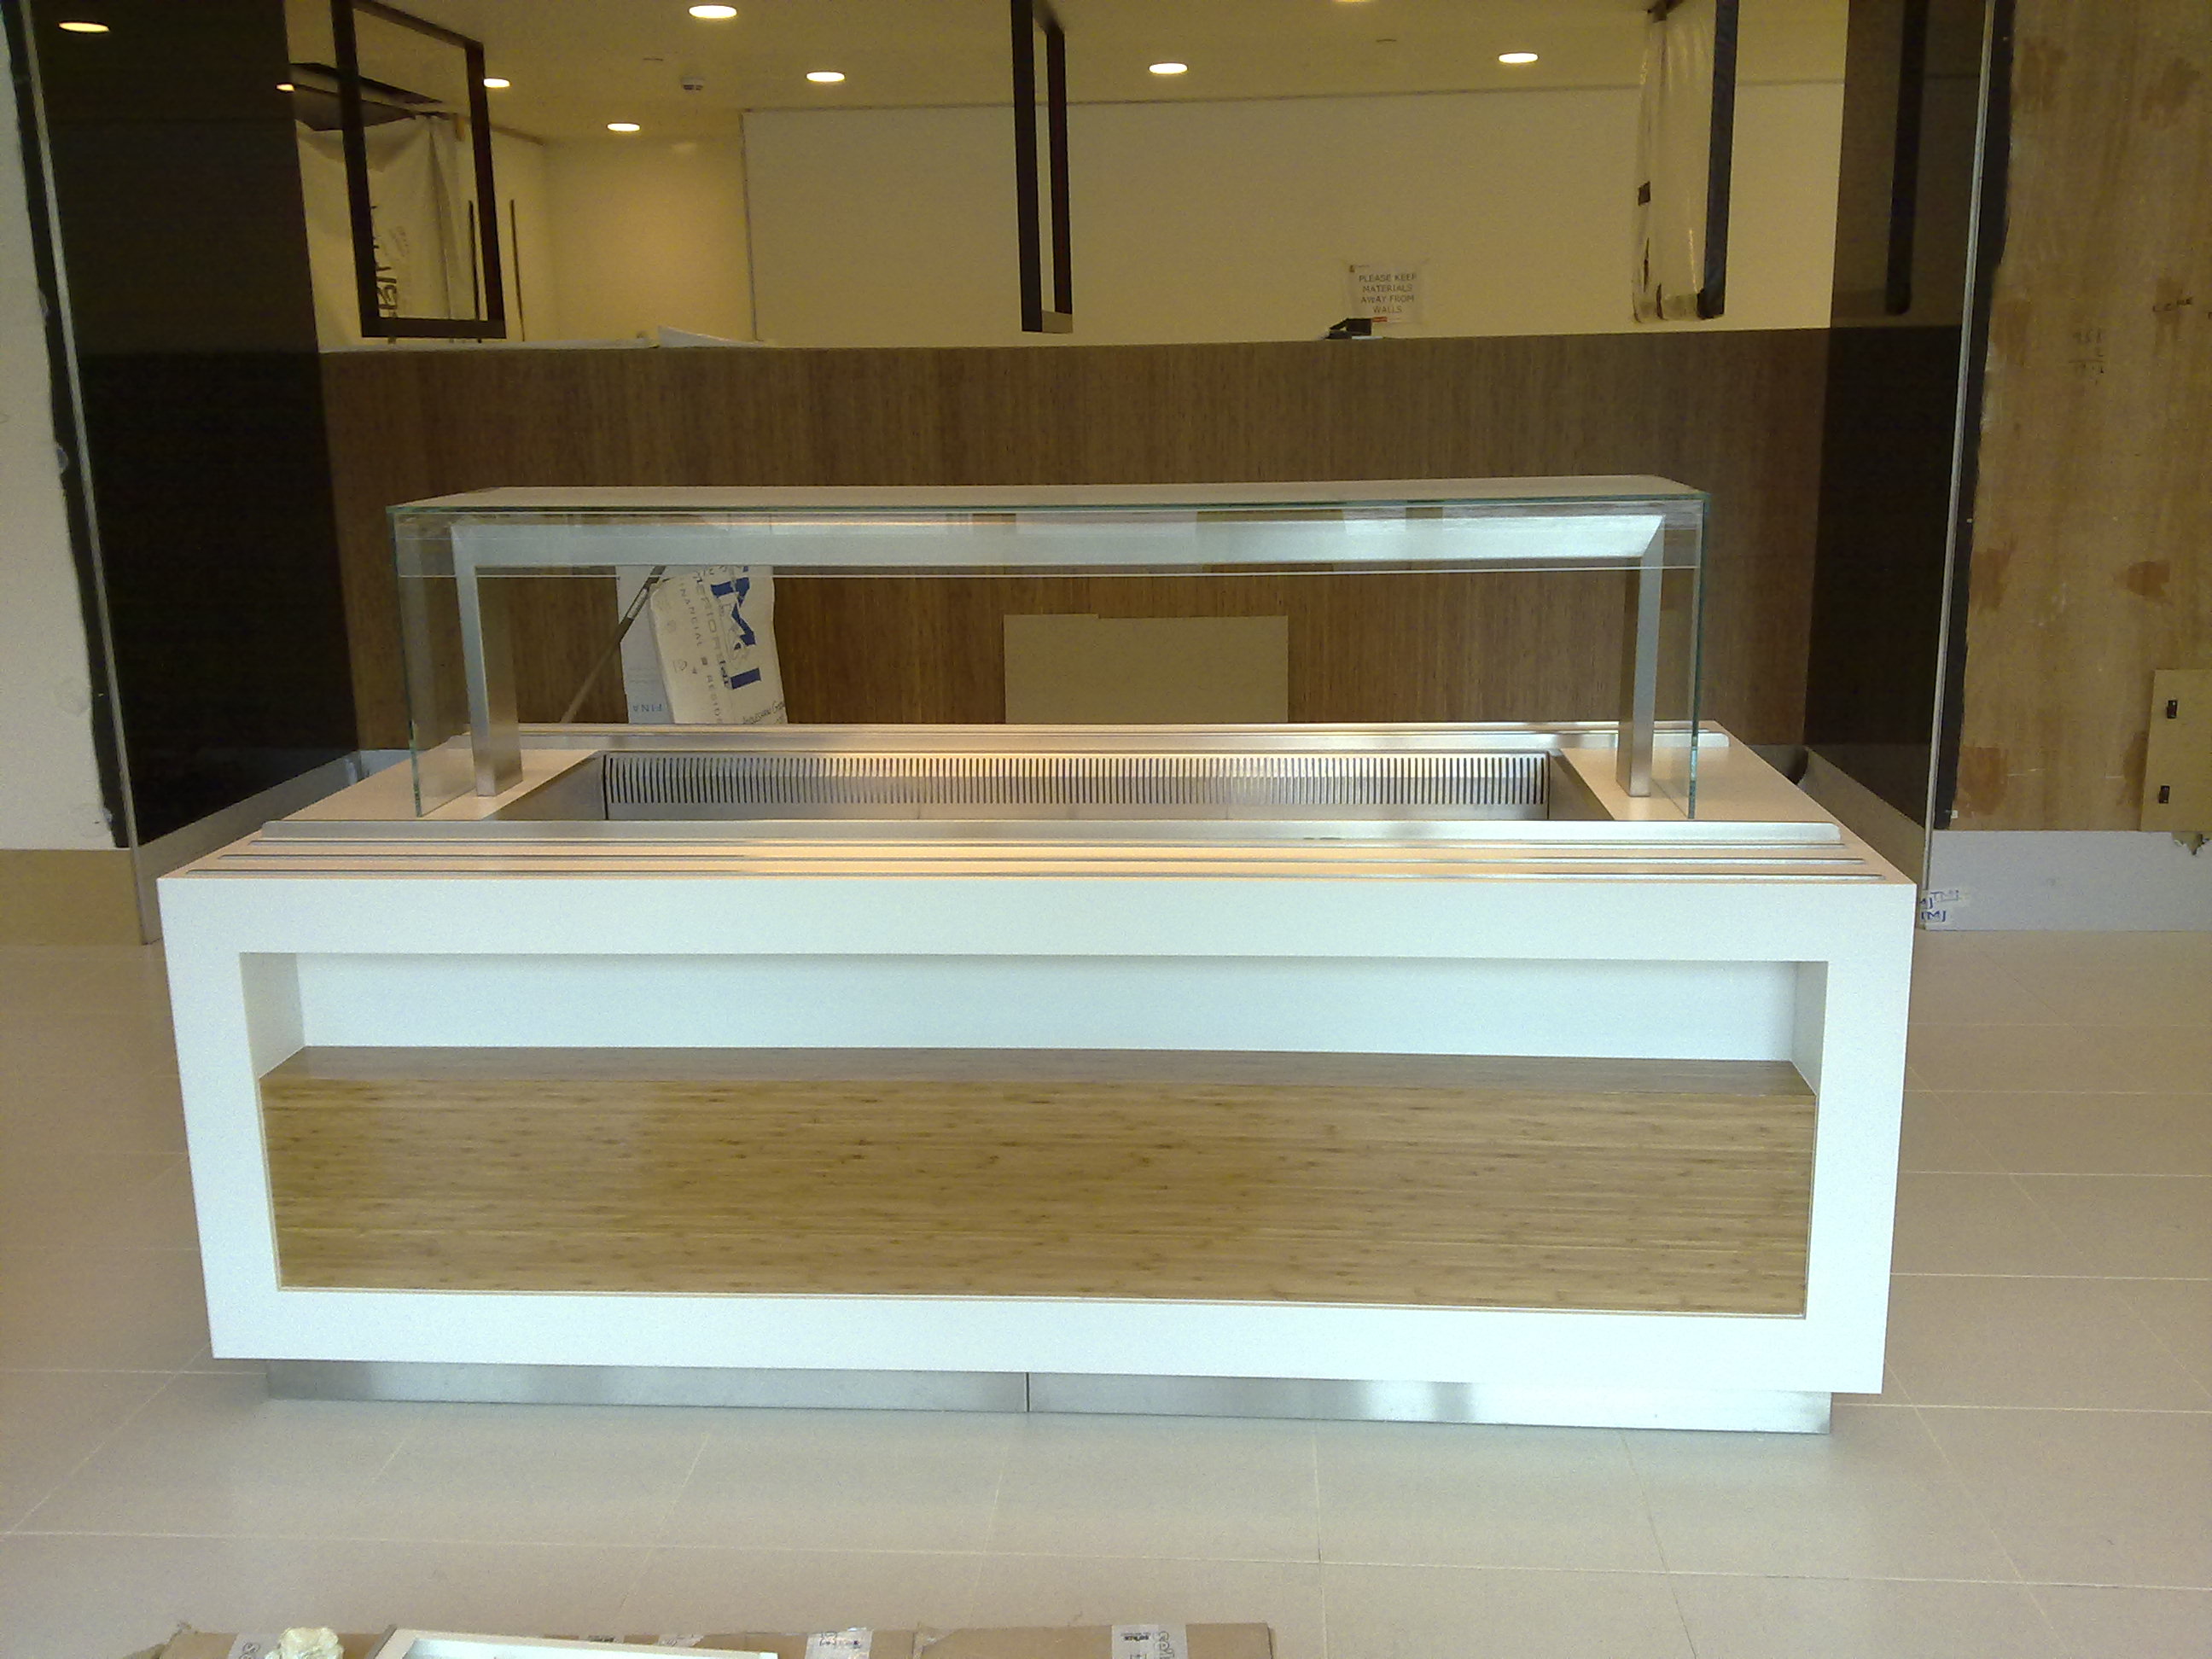 (Addleshaw) Law firm  – London  Glacier white corian and stainless steel tray runners throughout with bamboo veneer impulse displays 